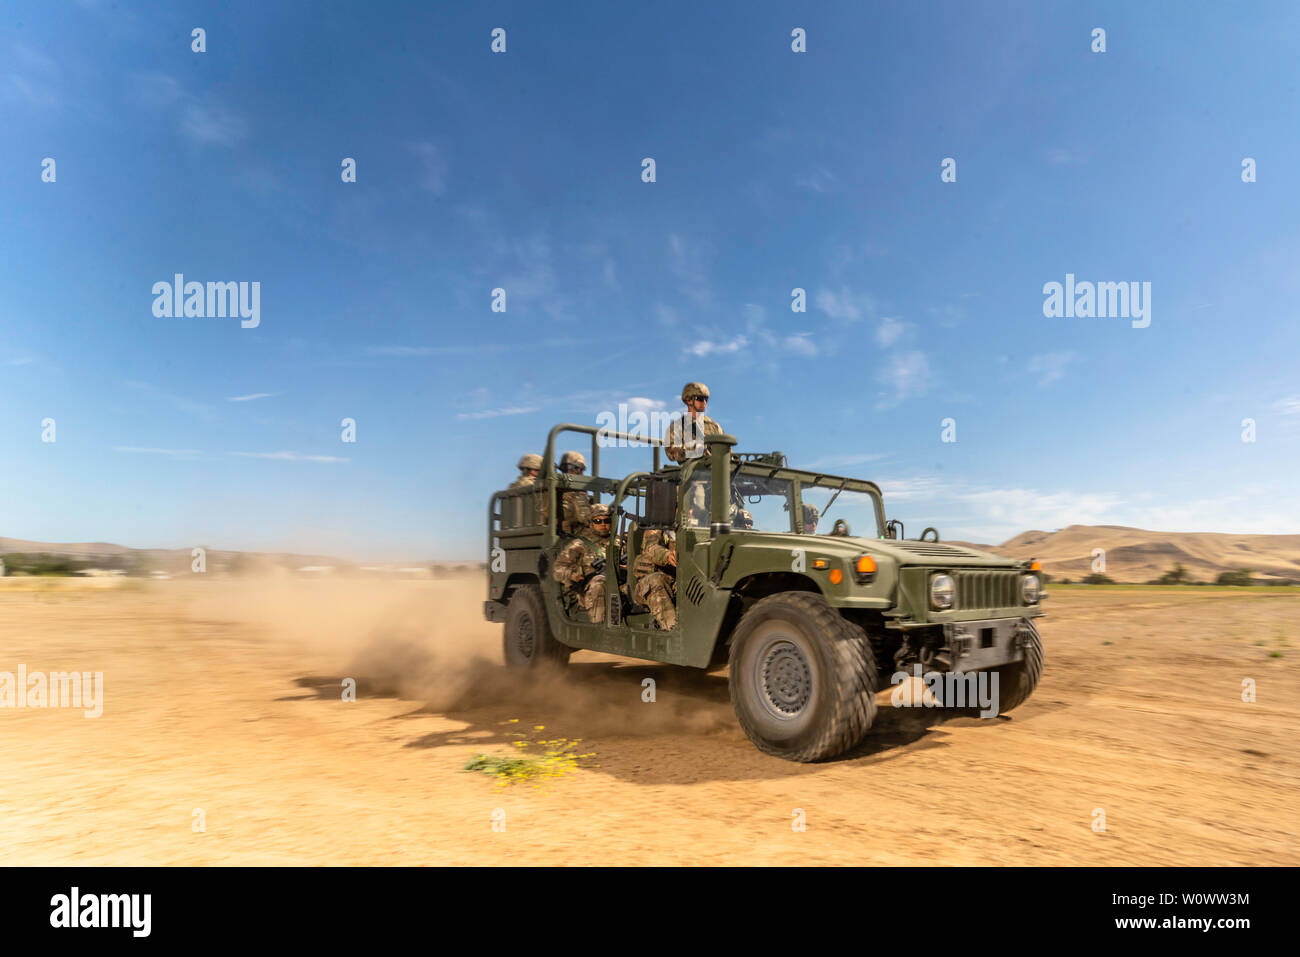 Soldiers of 40th Infantry Division pose during a staged photography operation during 2019's Annual Training on Camp Roberts Training Base, California, June 26. Soldiers were testing new High Mobility Multipurpose Wheeled Vehicle (HMMWV) modification kits in the field during this AT.  (U.S. Army photo by Sgt. Jack J. Adamyk, 40th Infantry Division public affairs) Stock Photo